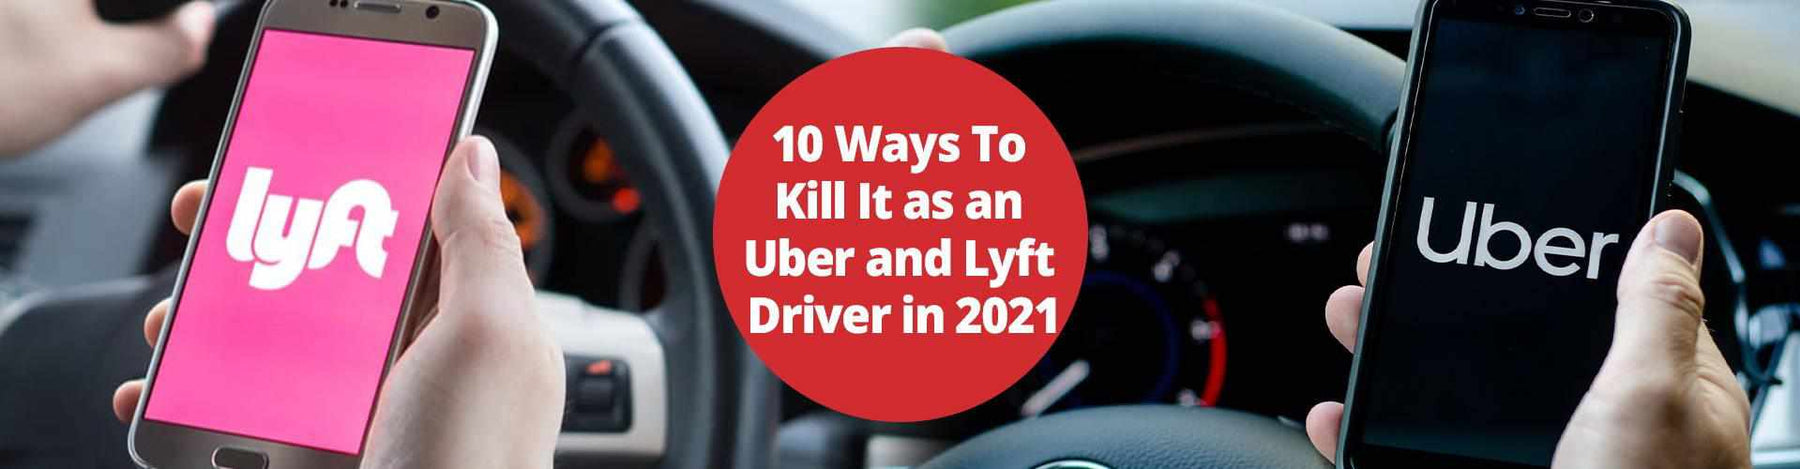 10 Ways To Kill It as an Uber and Lyft Driver in 2021 - - BlackboxMyCar Canada